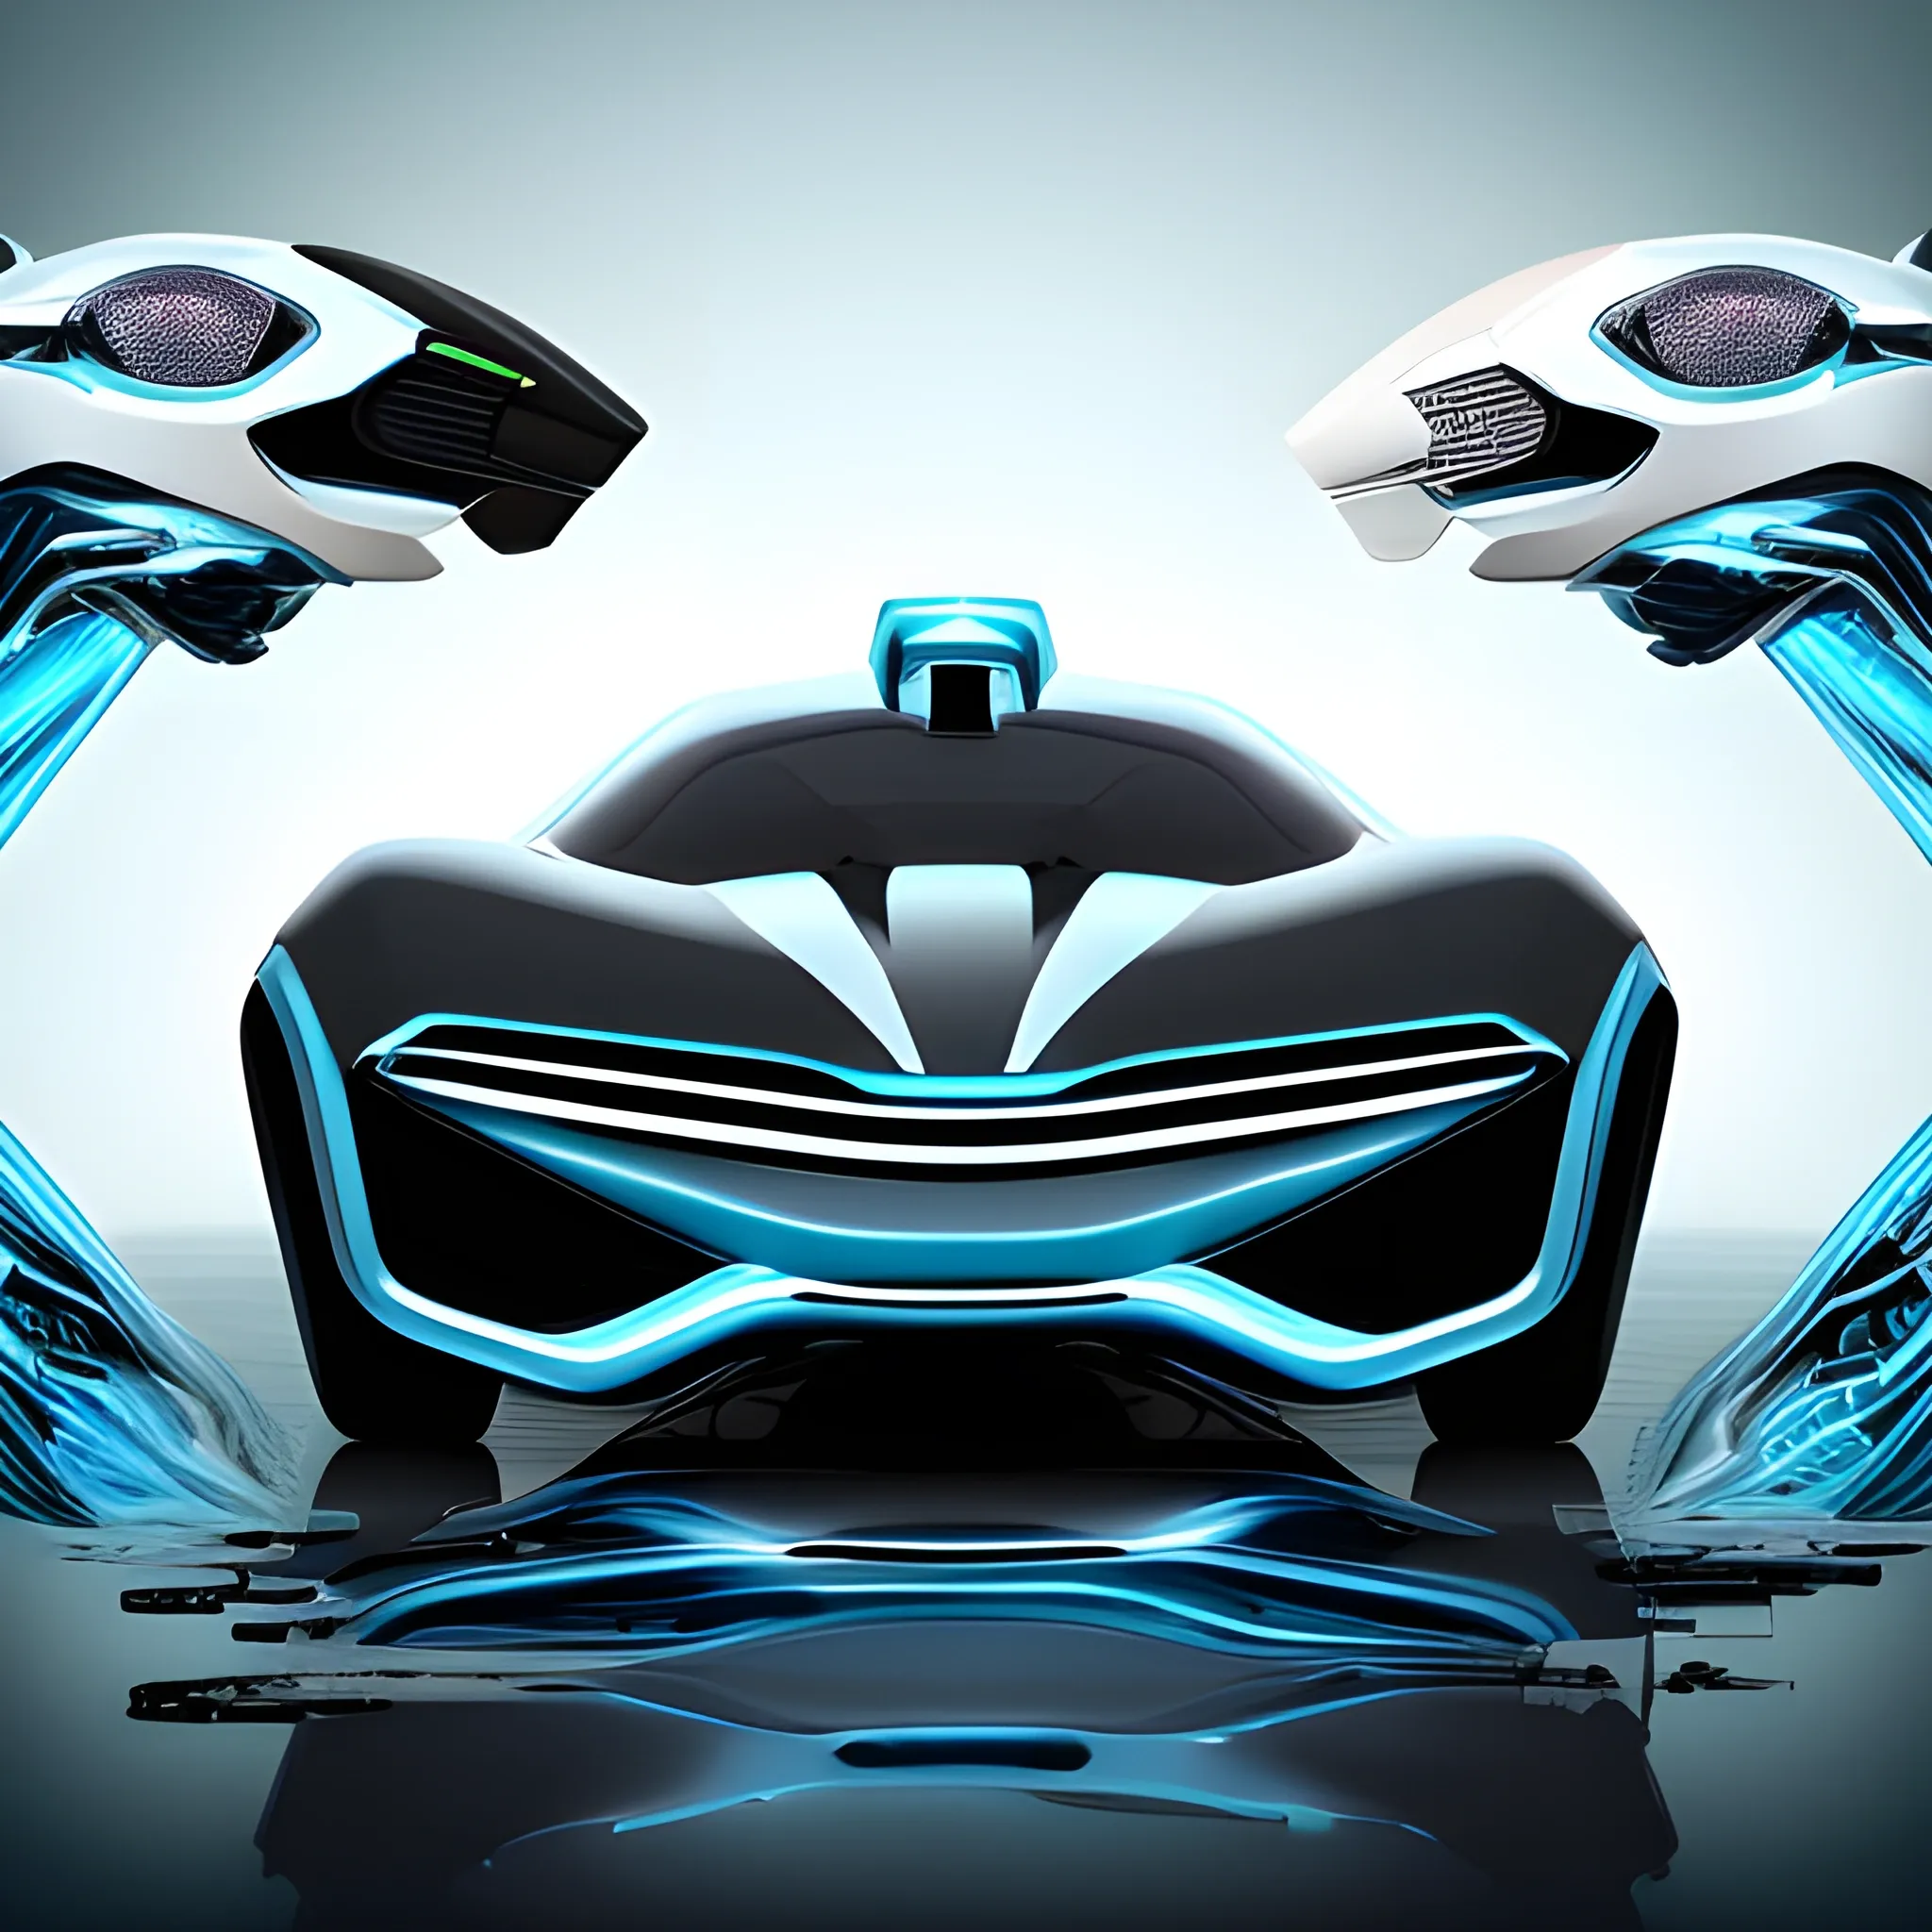 Create a compelling and visually striking image that represents the concept of car design, transphobia, sickness, detailed car features, image should capture the essence of technology-driven change, innovation, and adaptation in the modern digital age. futuristic technology, and a sense of progress and evolution